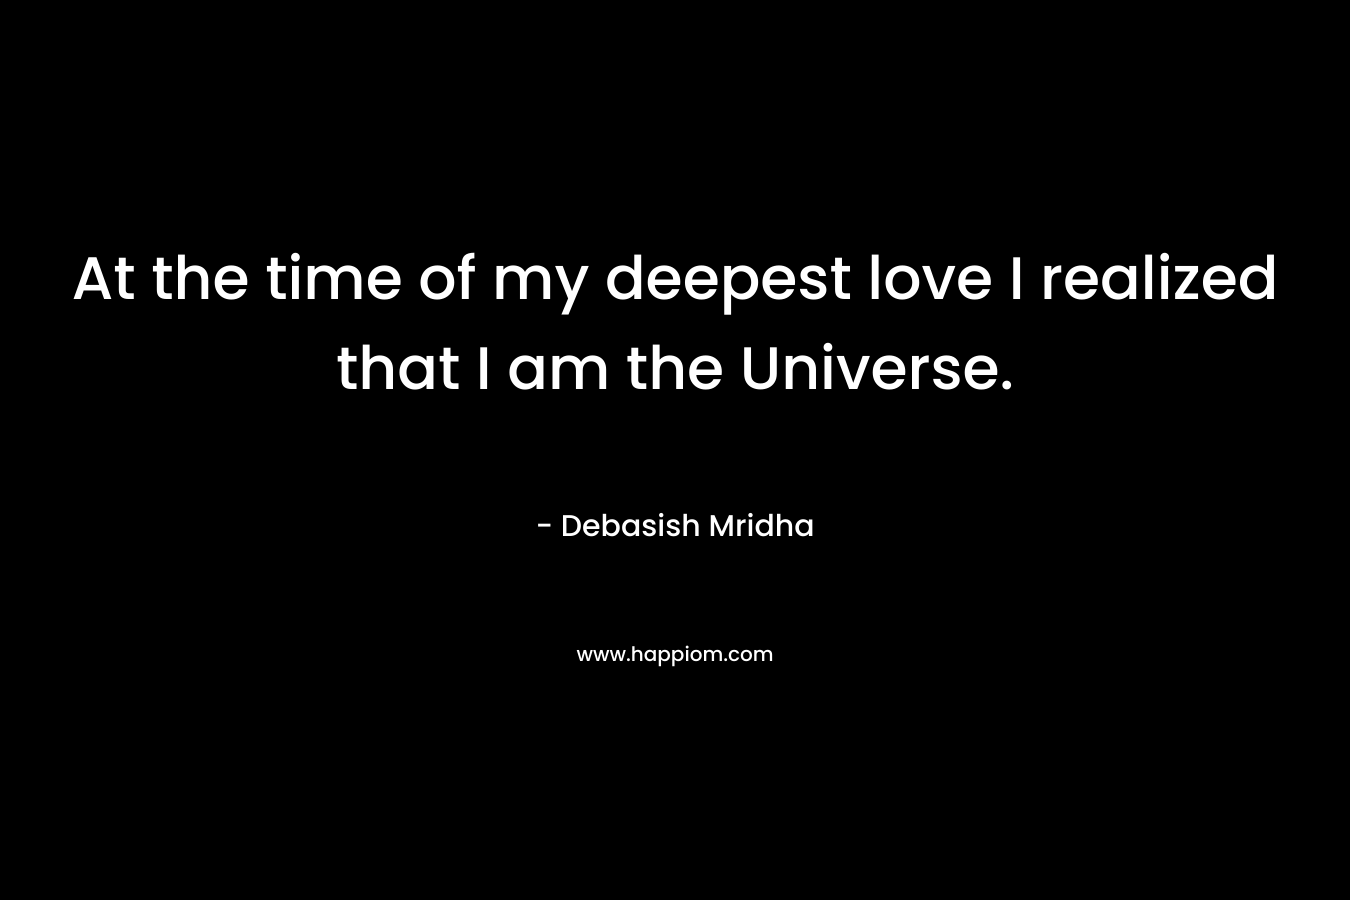 At the time of my deepest love I realized that I am the Universe.